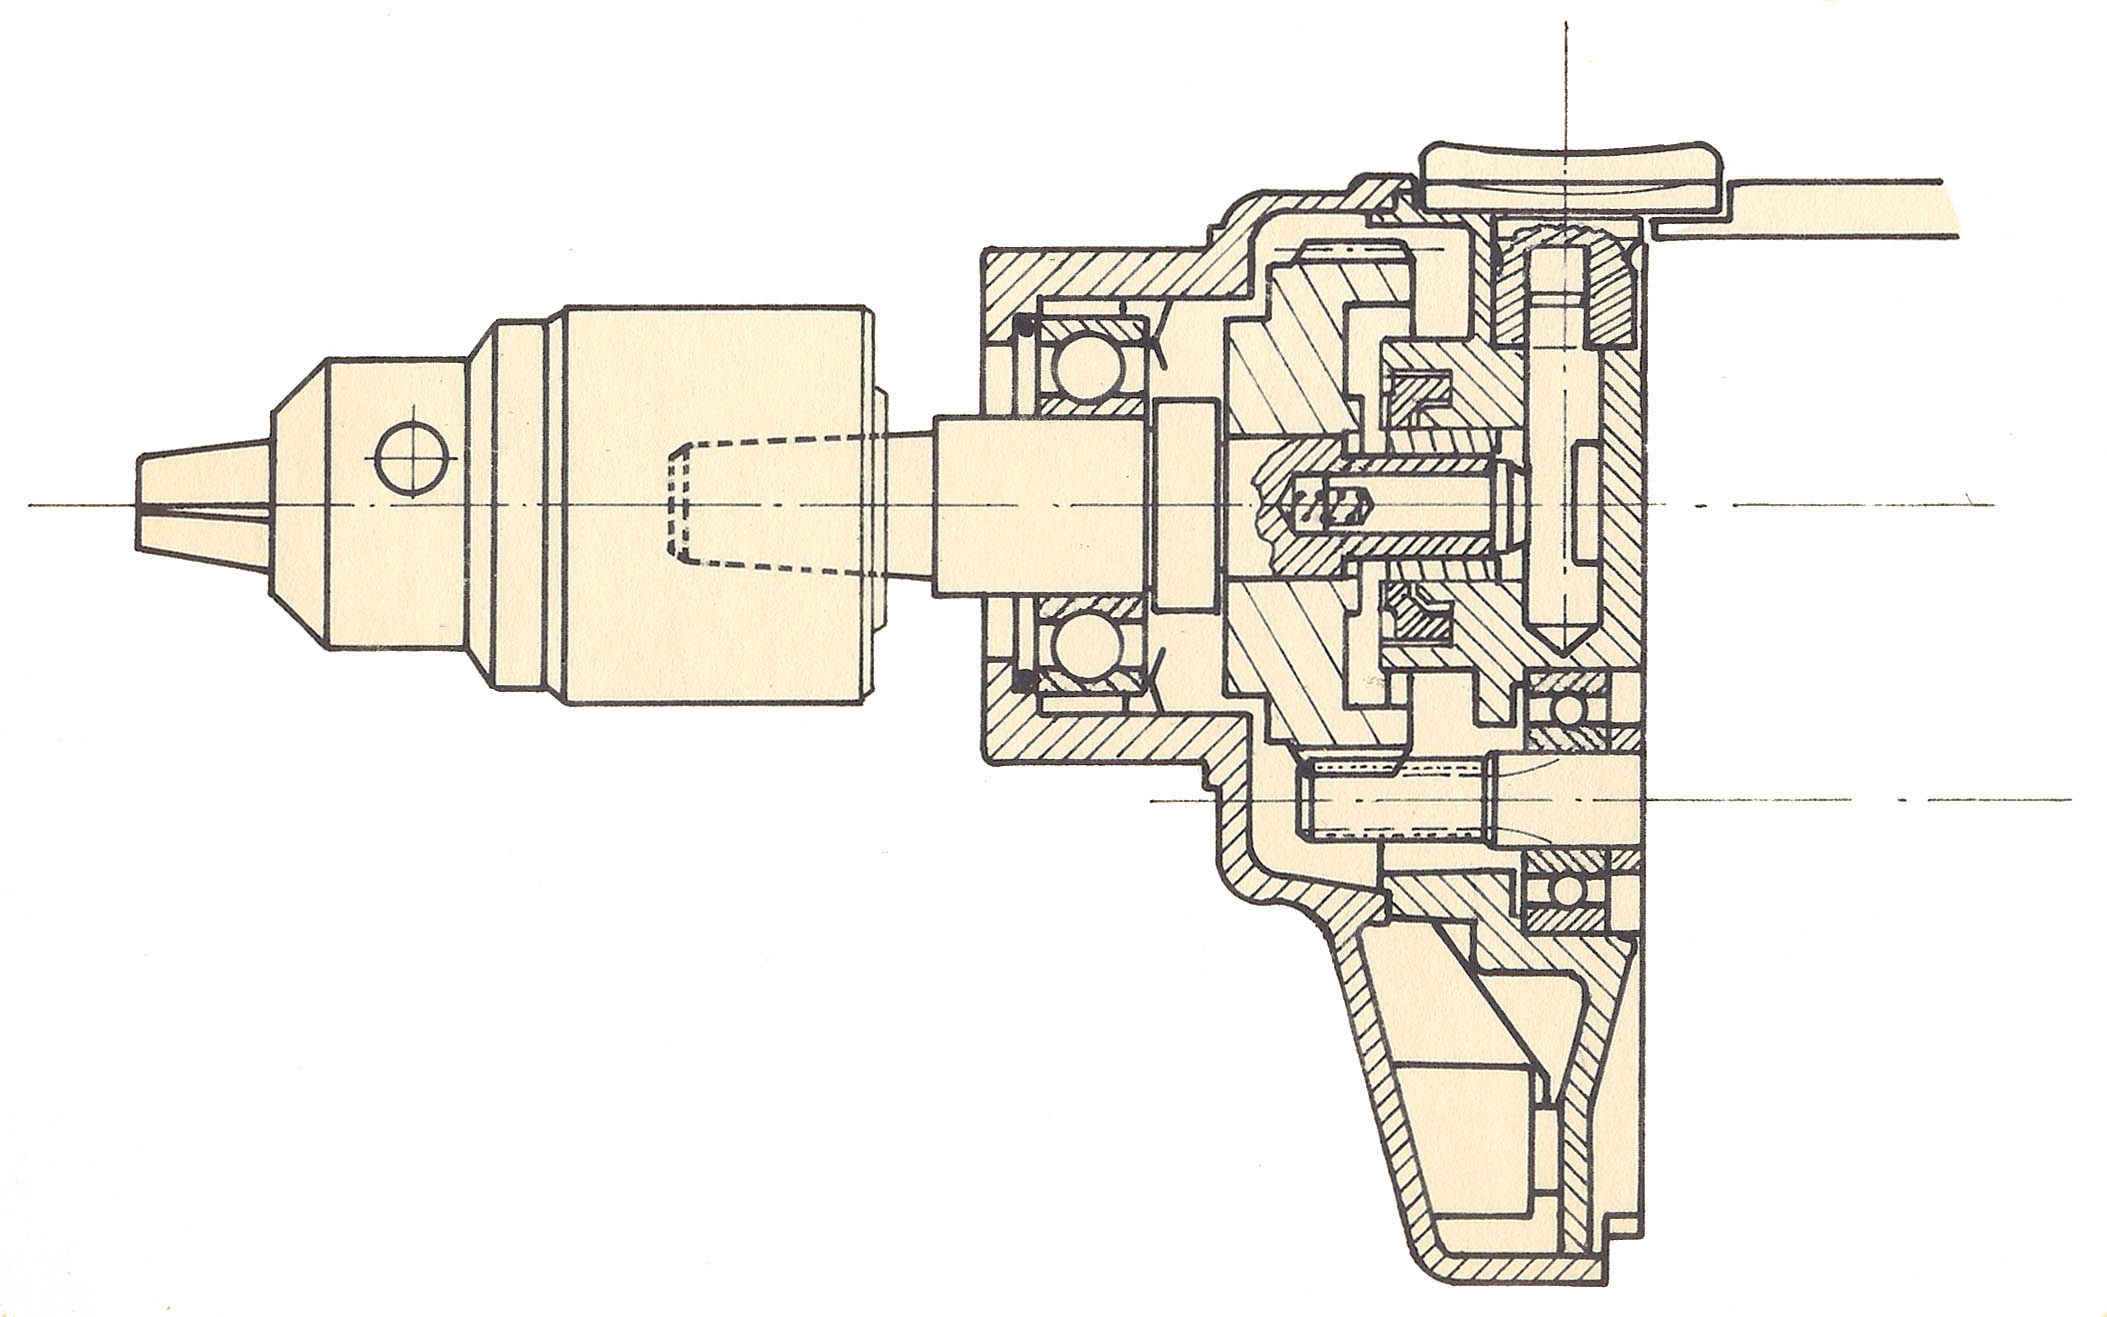 Cross section of head of dril 1472H - Date unknown